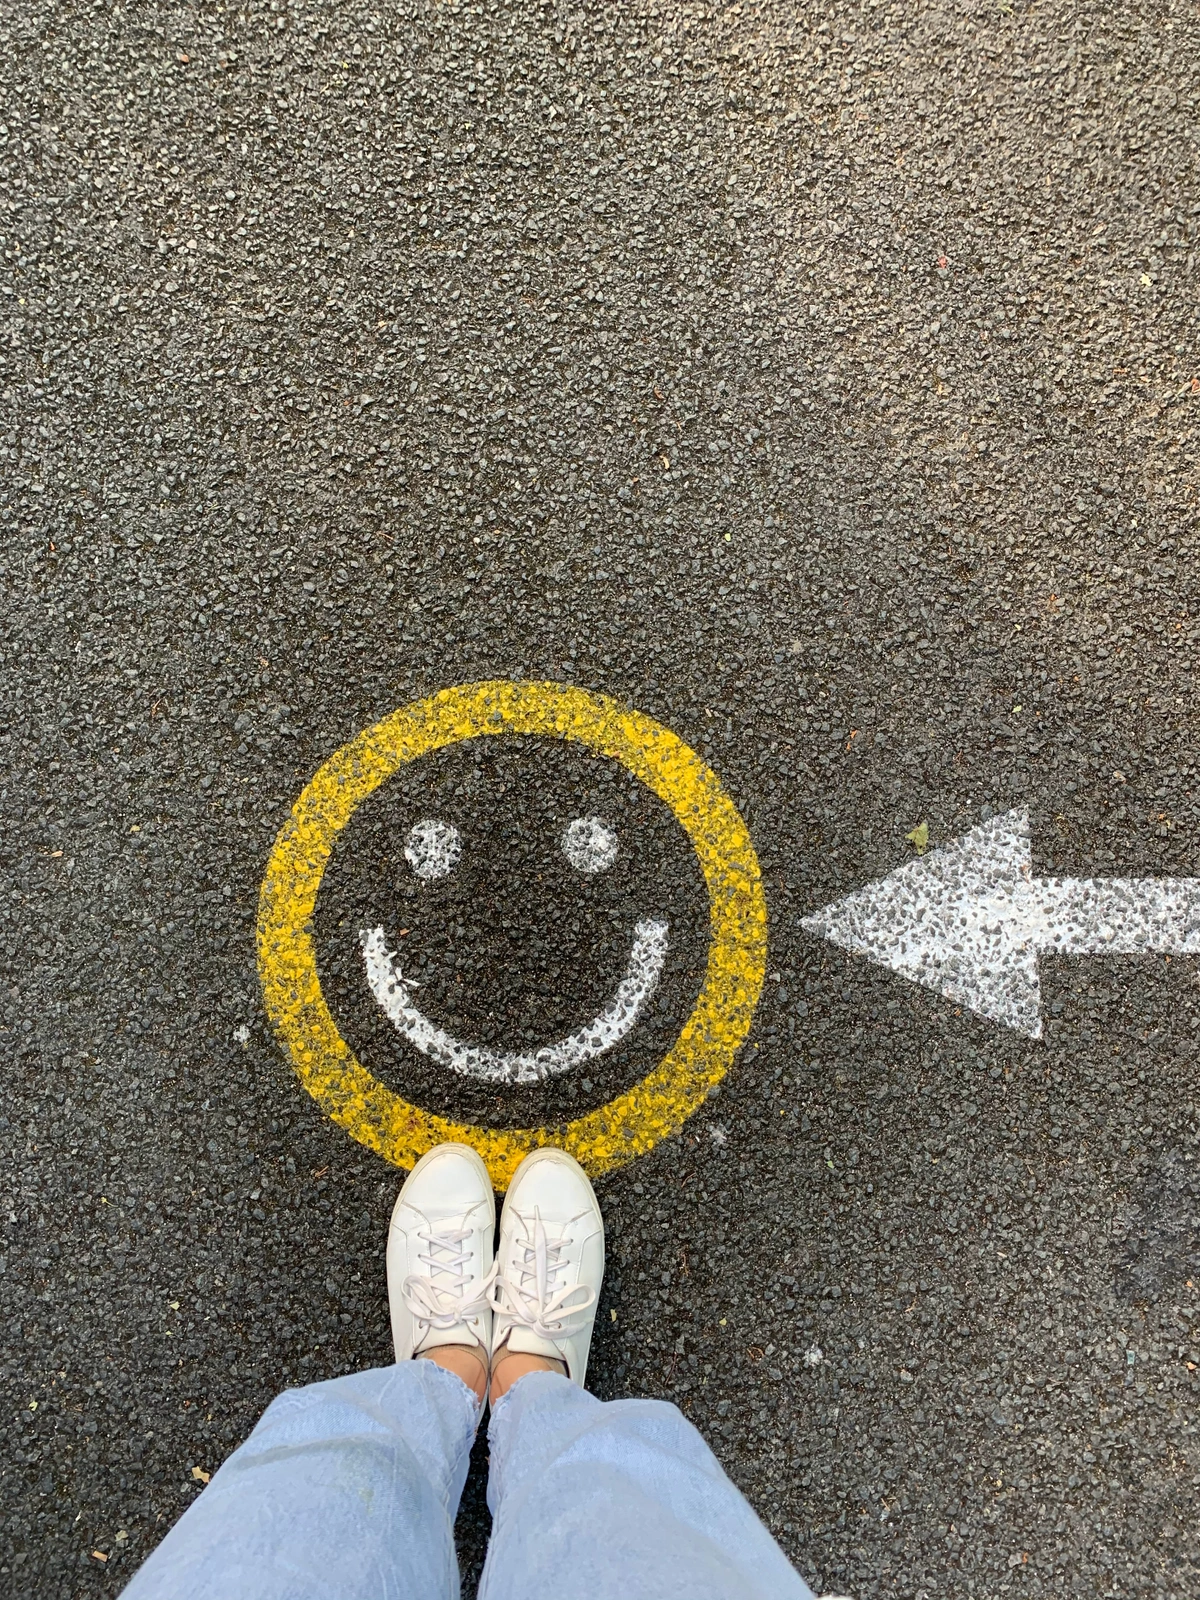 A chalk drawing of a smiley face on a path indicates a positive customer experience.